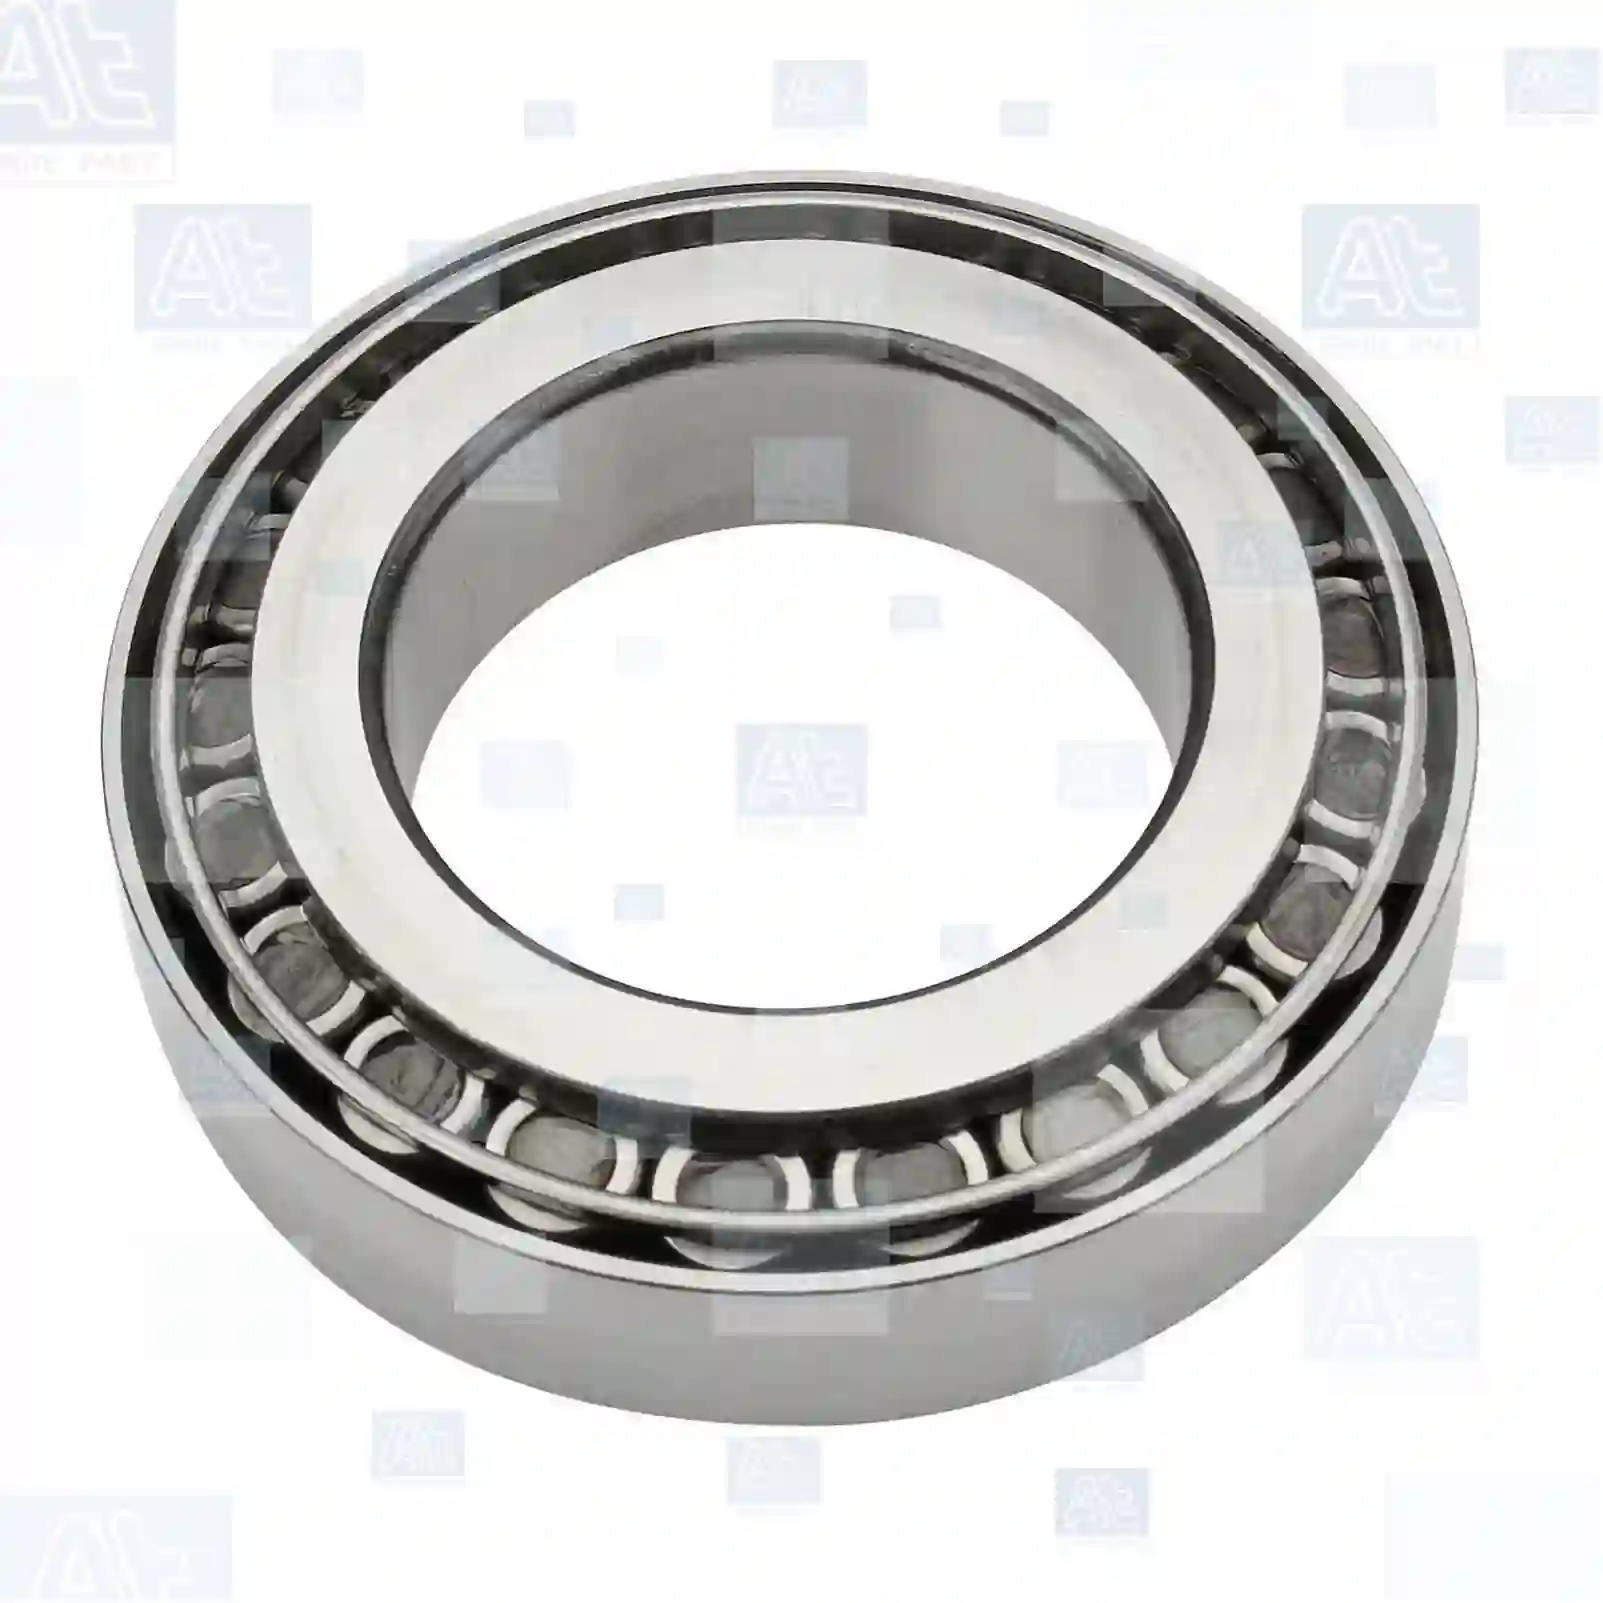 Tapered roller bearing, 77725217, 000337133, 01103771, 94036574, 94057672, 94060942, 988475101, 988475101A, 1-09812044-0, 1-09812053-0, 1-09812153-0, 1-09812154-0, 1-09812168-0, 1-09812244-0, 9-00093161-0, 01103771, 1103771, 26800210, 06324901400, 06324990005, 06324990200, 81934206096, 87523301010, A0023432215, A0773221500, 996032215, 0009817405, 0009818405, 0019814805, 3279810305, 9429810205, MH043001, 01014-10584, 0023432215, 0773221500, 0959232215, 5000588934, 14102, 177893, 97699-32215, 11066, 2V5609747Q ||  77725217 At Spare Part | Engine, Accelerator Pedal, Camshaft, Connecting Rod, Crankcase, Crankshaft, Cylinder Head, Engine Suspension Mountings, Exhaust Manifold, Exhaust Gas Recirculation, Filter Kits, Flywheel Housing, General Overhaul Kits, Engine, Intake Manifold, Oil Cleaner, Oil Cooler, Oil Filter, Oil Pump, Oil Sump, Piston & Liner, Sensor & Switch, Timing Case, Turbocharger, Cooling System, Belt Tensioner, Coolant Filter, Coolant Pipe, Corrosion Prevention Agent, Drive, Expansion Tank, Fan, Intercooler, Monitors & Gauges, Radiator, Thermostat, V-Belt / Timing belt, Water Pump, Fuel System, Electronical Injector Unit, Feed Pump, Fuel Filter, cpl., Fuel Gauge Sender,  Fuel Line, Fuel Pump, Fuel Tank, Injection Line Kit, Injection Pump, Exhaust System, Clutch & Pedal, Gearbox, Propeller Shaft, Axles, Brake System, Hubs & Wheels, Suspension, Leaf Spring, Universal Parts / Accessories, Steering, Electrical System, Cabin Tapered roller bearing, 77725217, 000337133, 01103771, 94036574, 94057672, 94060942, 988475101, 988475101A, 1-09812044-0, 1-09812053-0, 1-09812153-0, 1-09812154-0, 1-09812168-0, 1-09812244-0, 9-00093161-0, 01103771, 1103771, 26800210, 06324901400, 06324990005, 06324990200, 81934206096, 87523301010, A0023432215, A0773221500, 996032215, 0009817405, 0009818405, 0019814805, 3279810305, 9429810205, MH043001, 01014-10584, 0023432215, 0773221500, 0959232215, 5000588934, 14102, 177893, 97699-32215, 11066, 2V5609747Q ||  77725217 At Spare Part | Engine, Accelerator Pedal, Camshaft, Connecting Rod, Crankcase, Crankshaft, Cylinder Head, Engine Suspension Mountings, Exhaust Manifold, Exhaust Gas Recirculation, Filter Kits, Flywheel Housing, General Overhaul Kits, Engine, Intake Manifold, Oil Cleaner, Oil Cooler, Oil Filter, Oil Pump, Oil Sump, Piston & Liner, Sensor & Switch, Timing Case, Turbocharger, Cooling System, Belt Tensioner, Coolant Filter, Coolant Pipe, Corrosion Prevention Agent, Drive, Expansion Tank, Fan, Intercooler, Monitors & Gauges, Radiator, Thermostat, V-Belt / Timing belt, Water Pump, Fuel System, Electronical Injector Unit, Feed Pump, Fuel Filter, cpl., Fuel Gauge Sender,  Fuel Line, Fuel Pump, Fuel Tank, Injection Line Kit, Injection Pump, Exhaust System, Clutch & Pedal, Gearbox, Propeller Shaft, Axles, Brake System, Hubs & Wheels, Suspension, Leaf Spring, Universal Parts / Accessories, Steering, Electrical System, Cabin